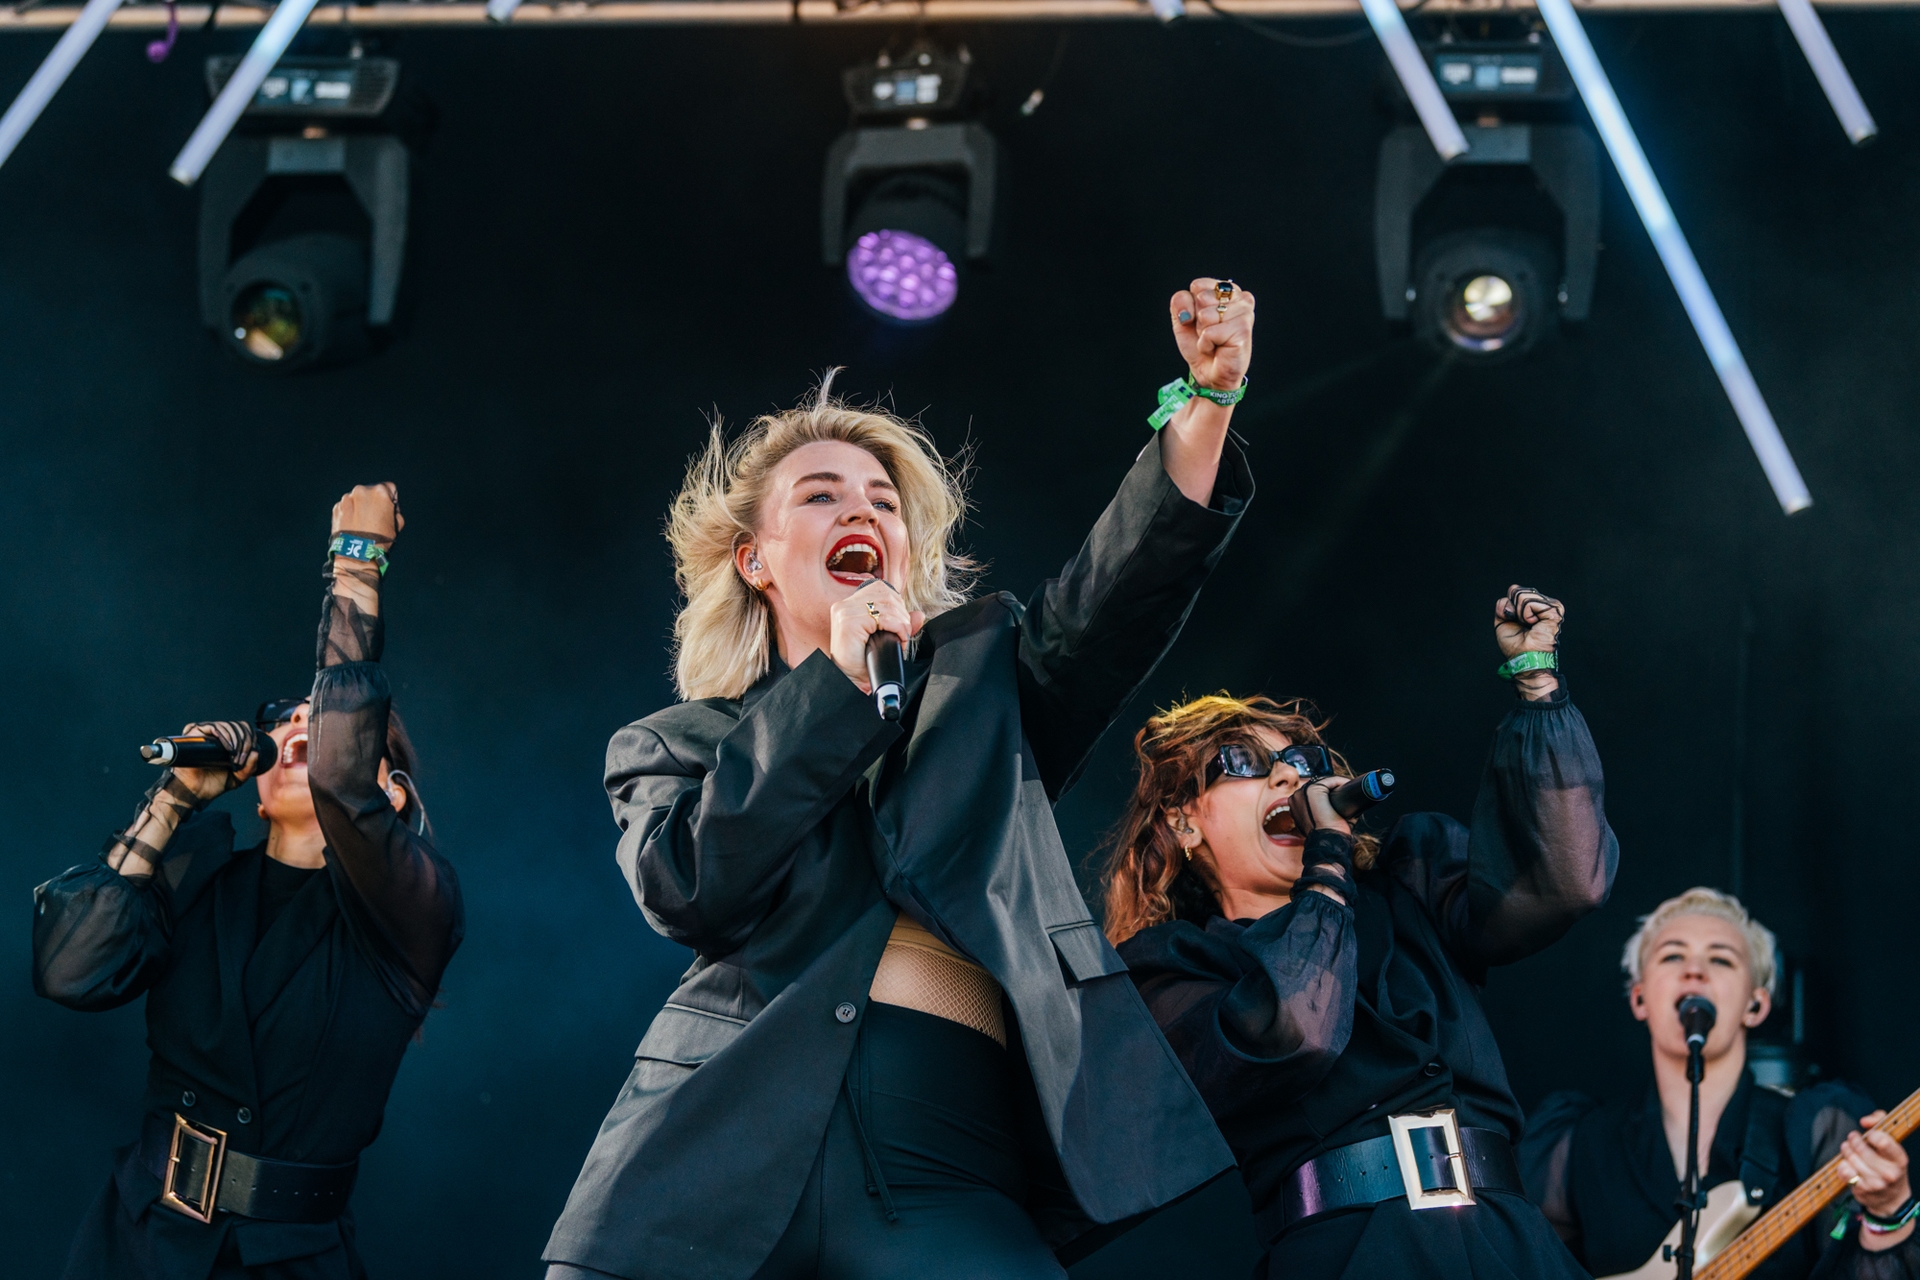 Self-Esteem performed on the King Tut's stage in front of an electric crowd. (Image: TRNSMT)